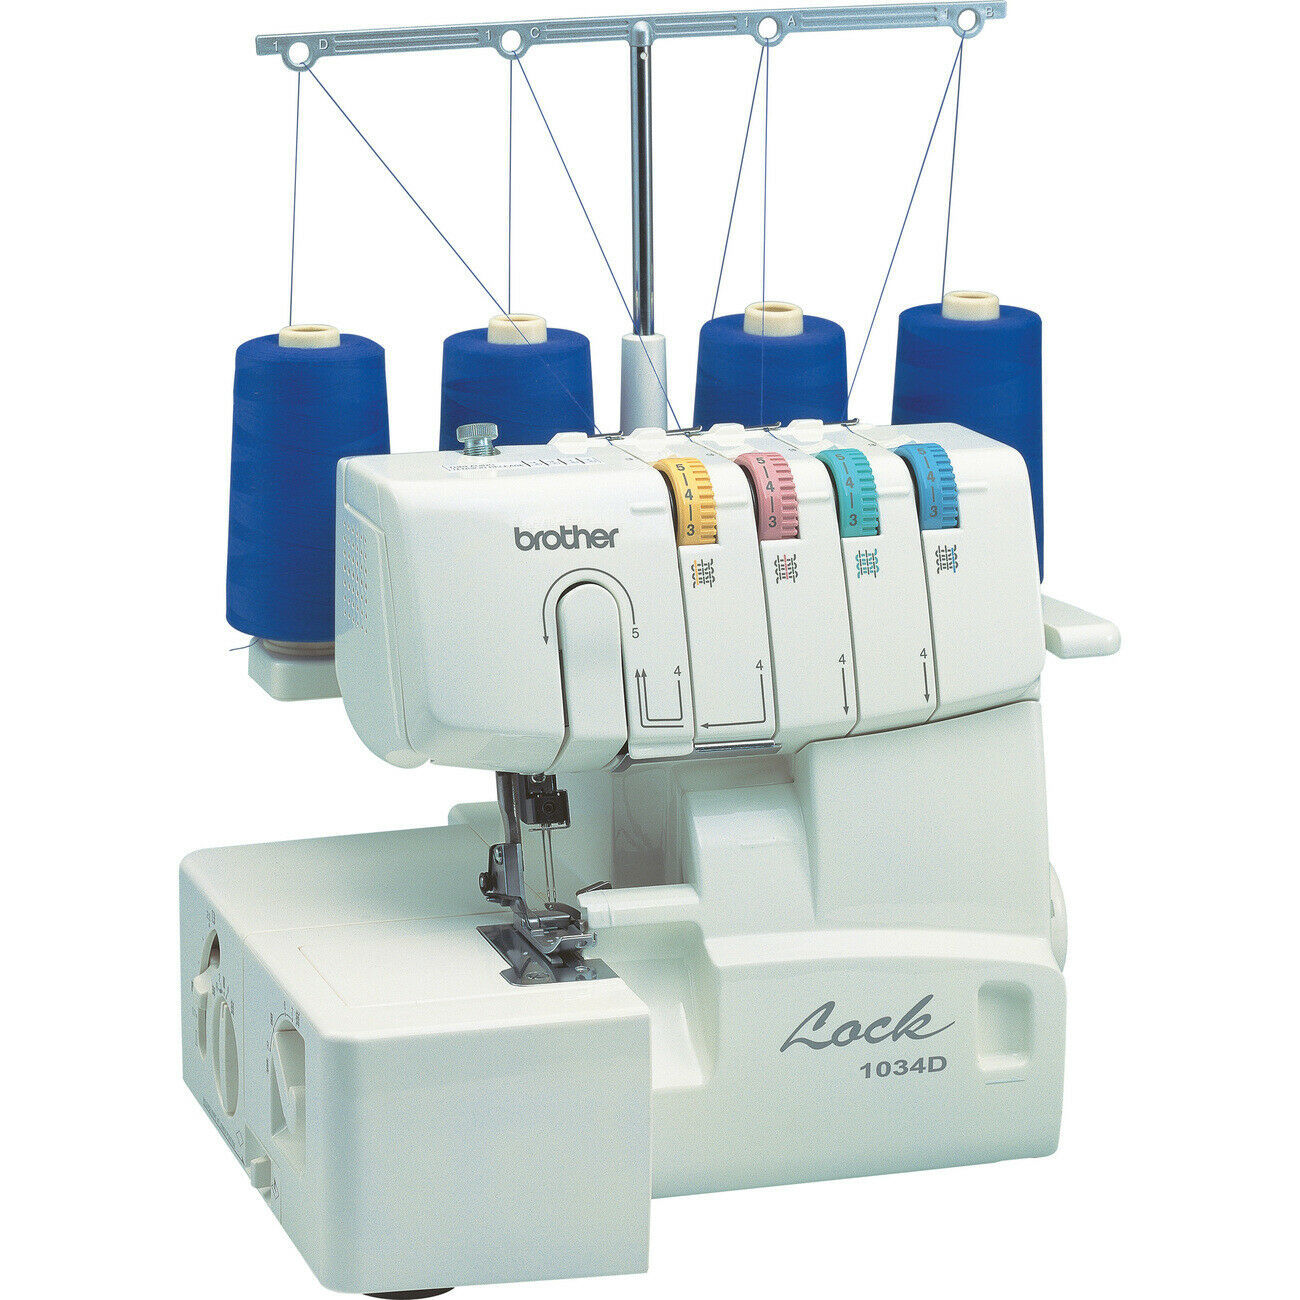 Primary image for Brother - 1034D - Electric Sewing Machine